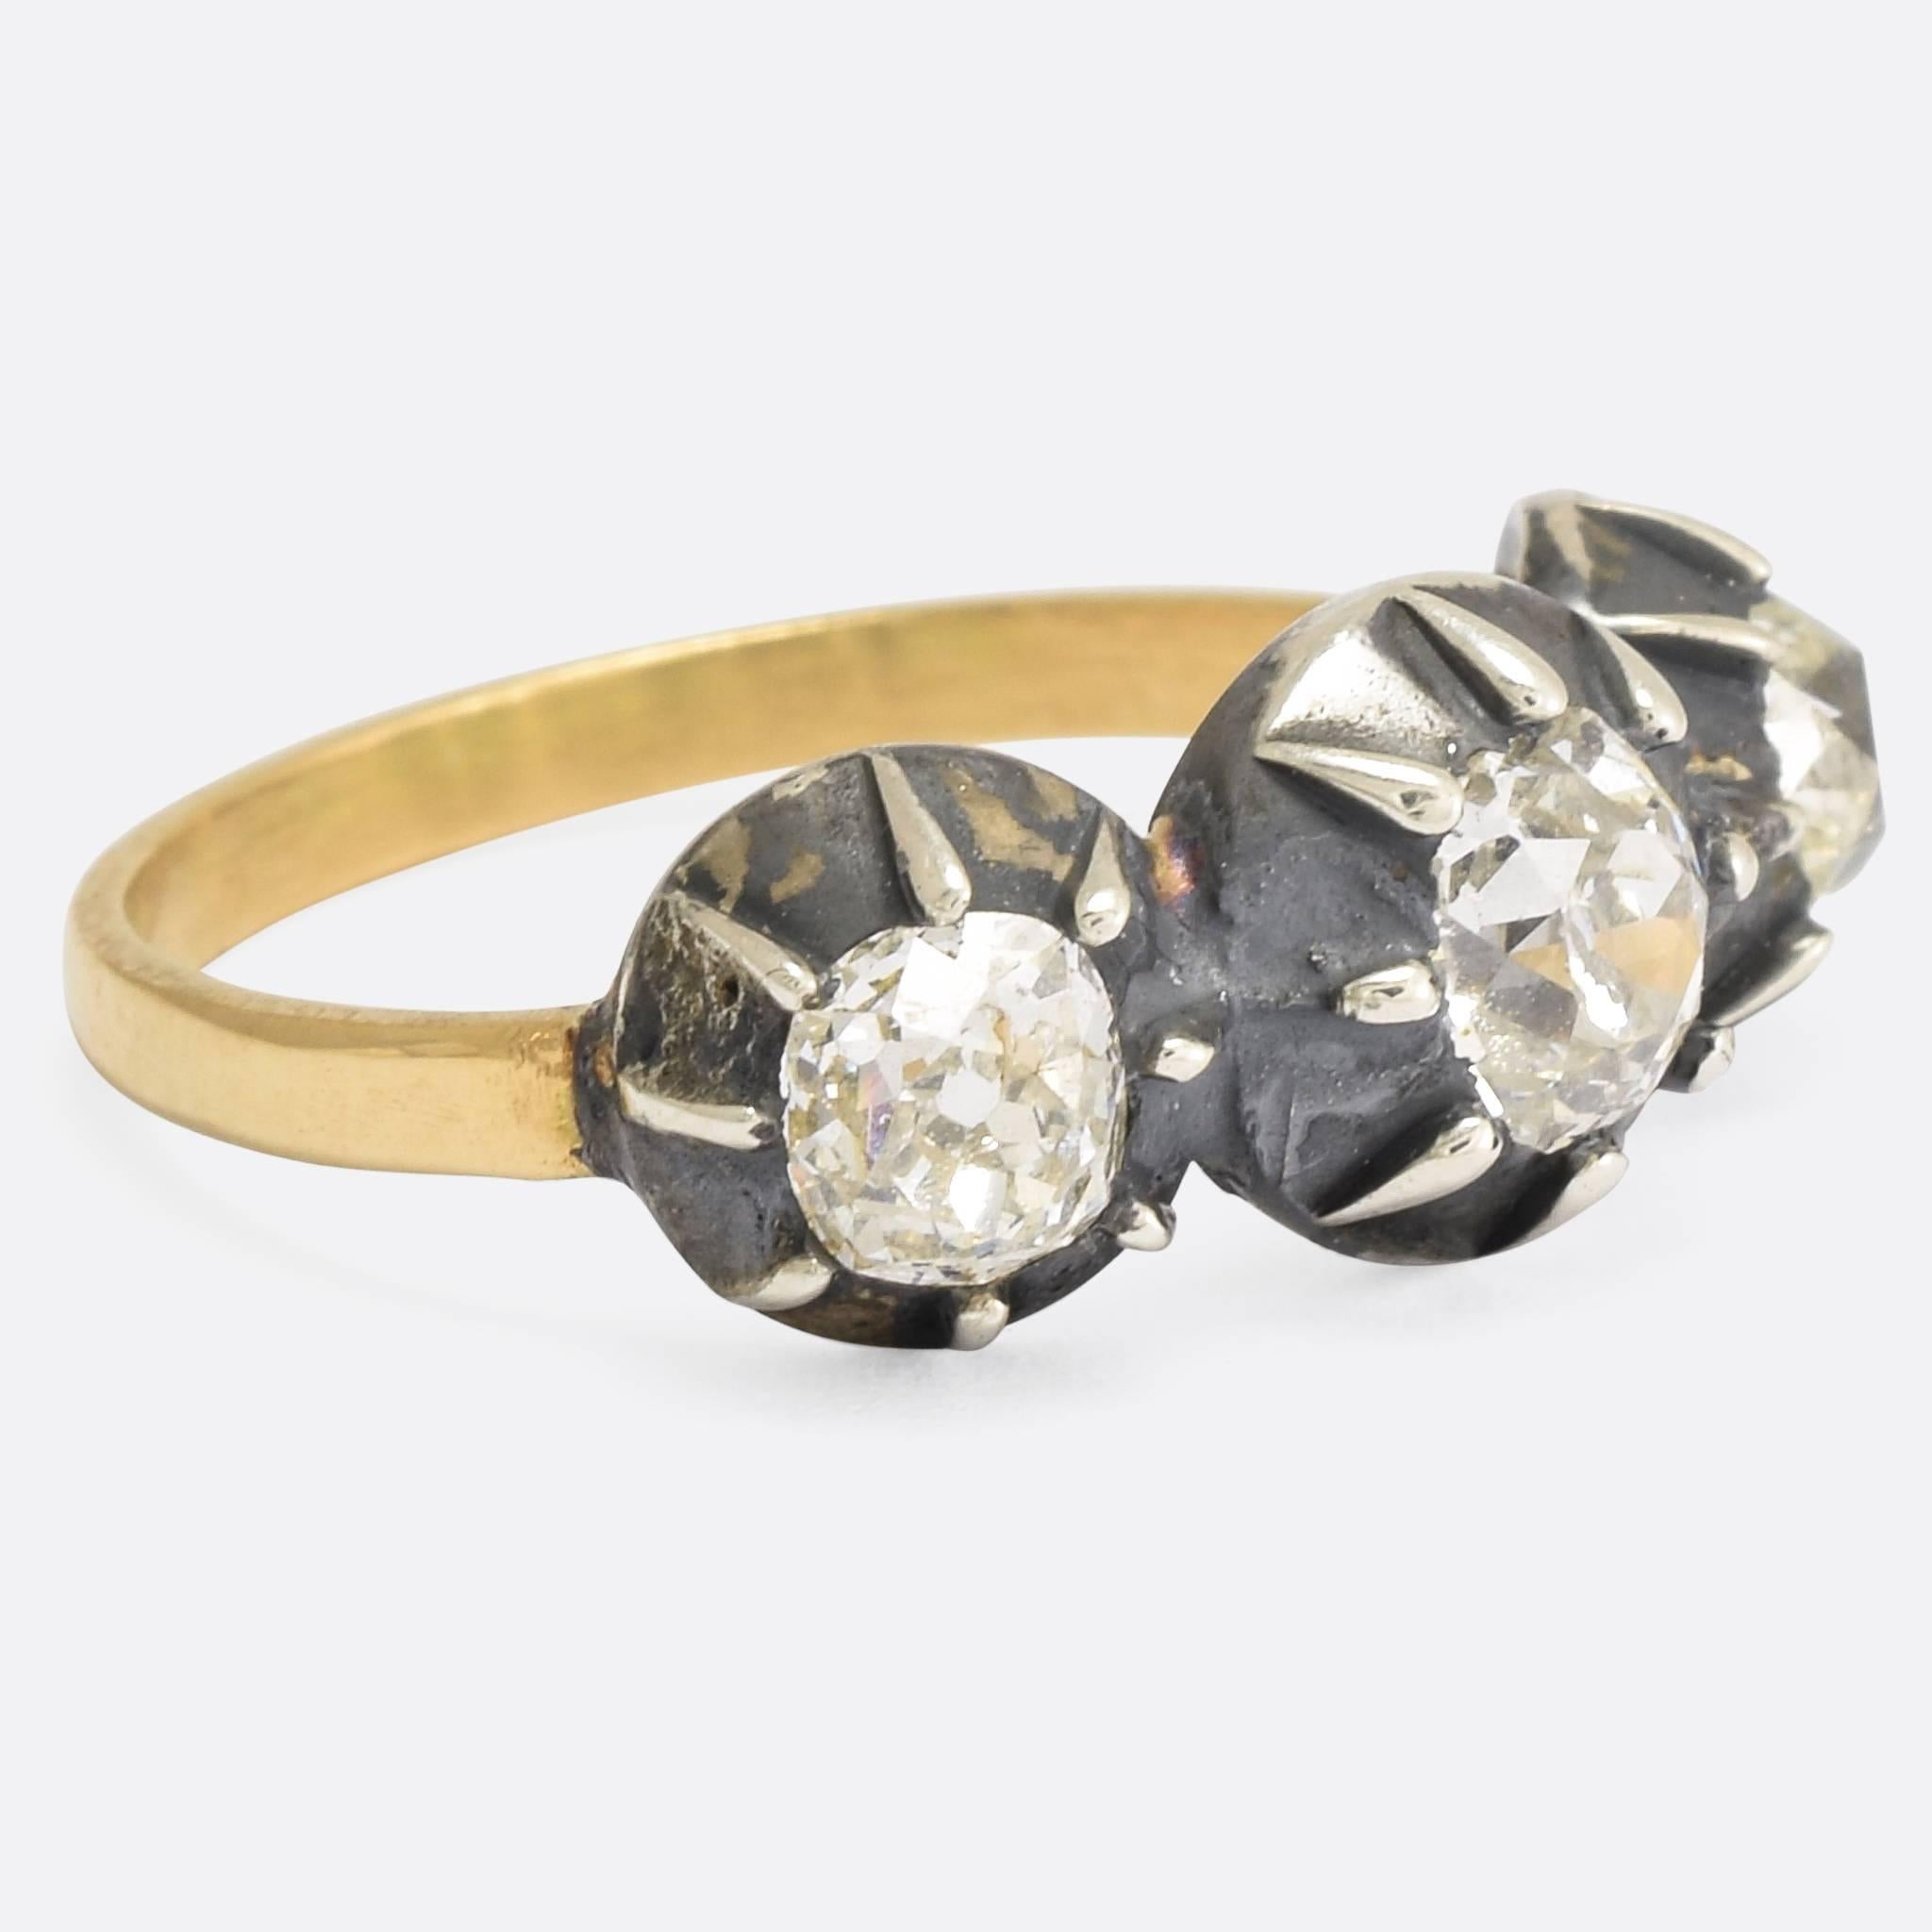 This wonderful Georgian ring is set with three deep old mine cut diamonds, in silver claw settings typical of the era. The stones are particularly clean and bright - the back having been opened to allow light behind them, further enhancing the